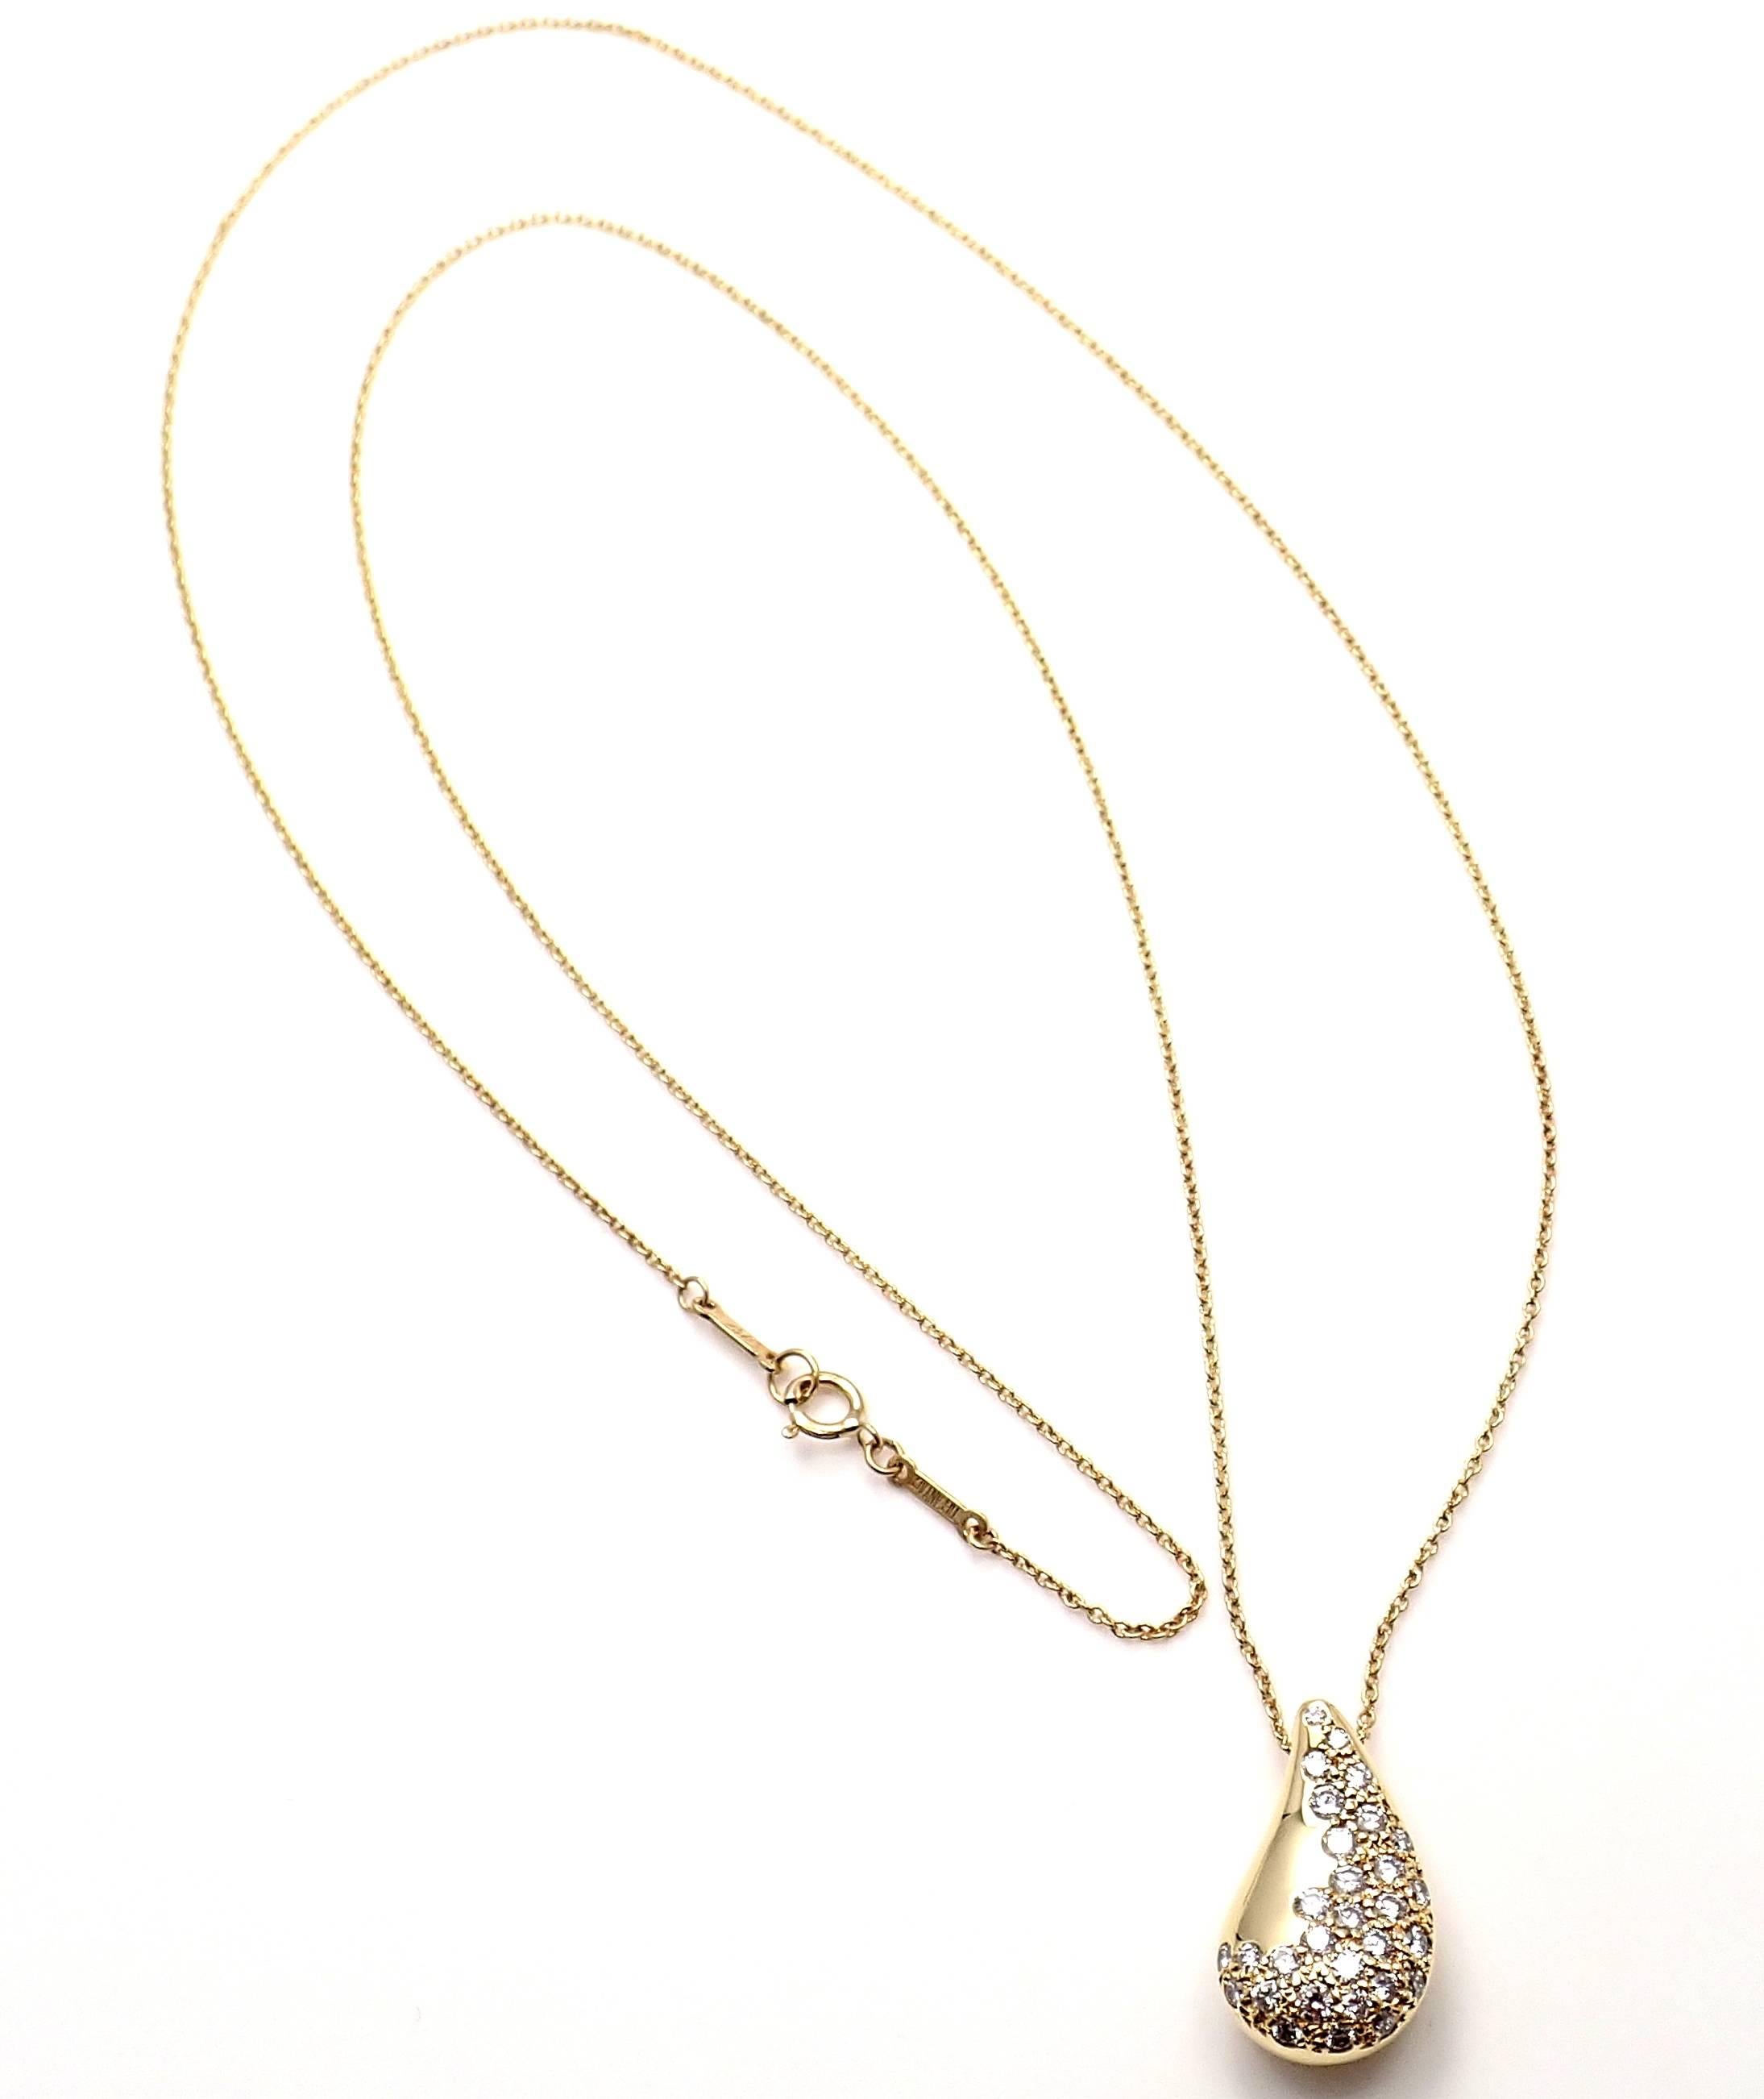 18k Yellow Gold Diamond Teardrop Pendant Necklace by Elsa Peretti for Tiffany & Co. 
With 30 Round brilliant cut diamonds VS1 clarity, E color total weight approx. .90ct
Details: 
Length: 24